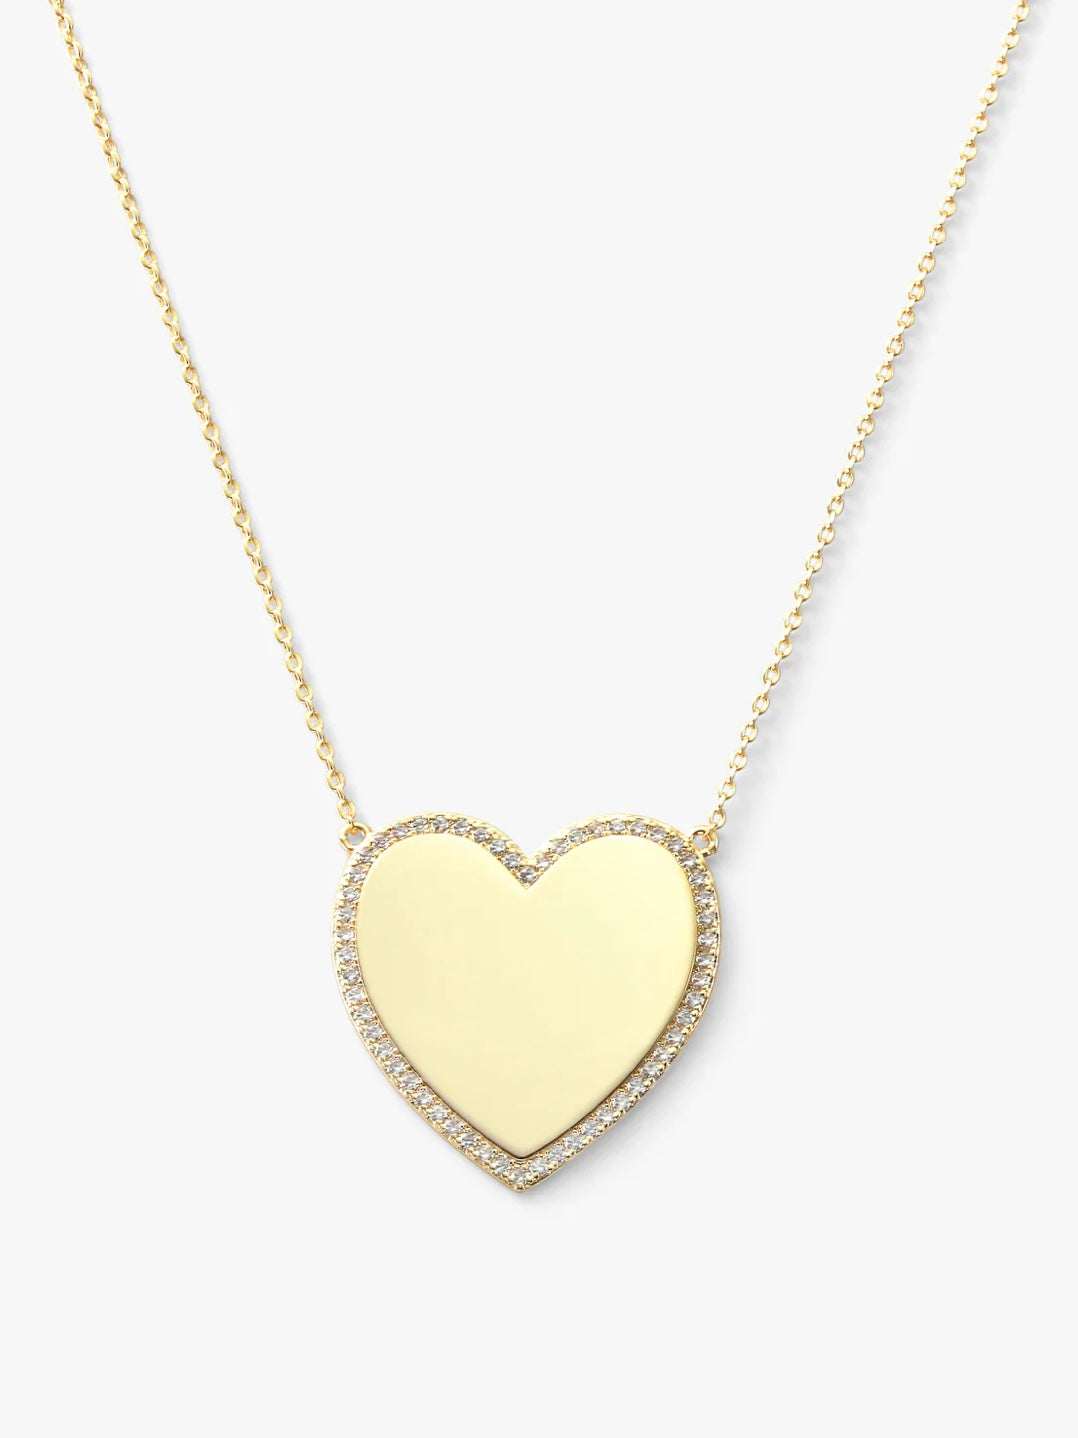 XL You Have My Heart Pave Necklace in Gold